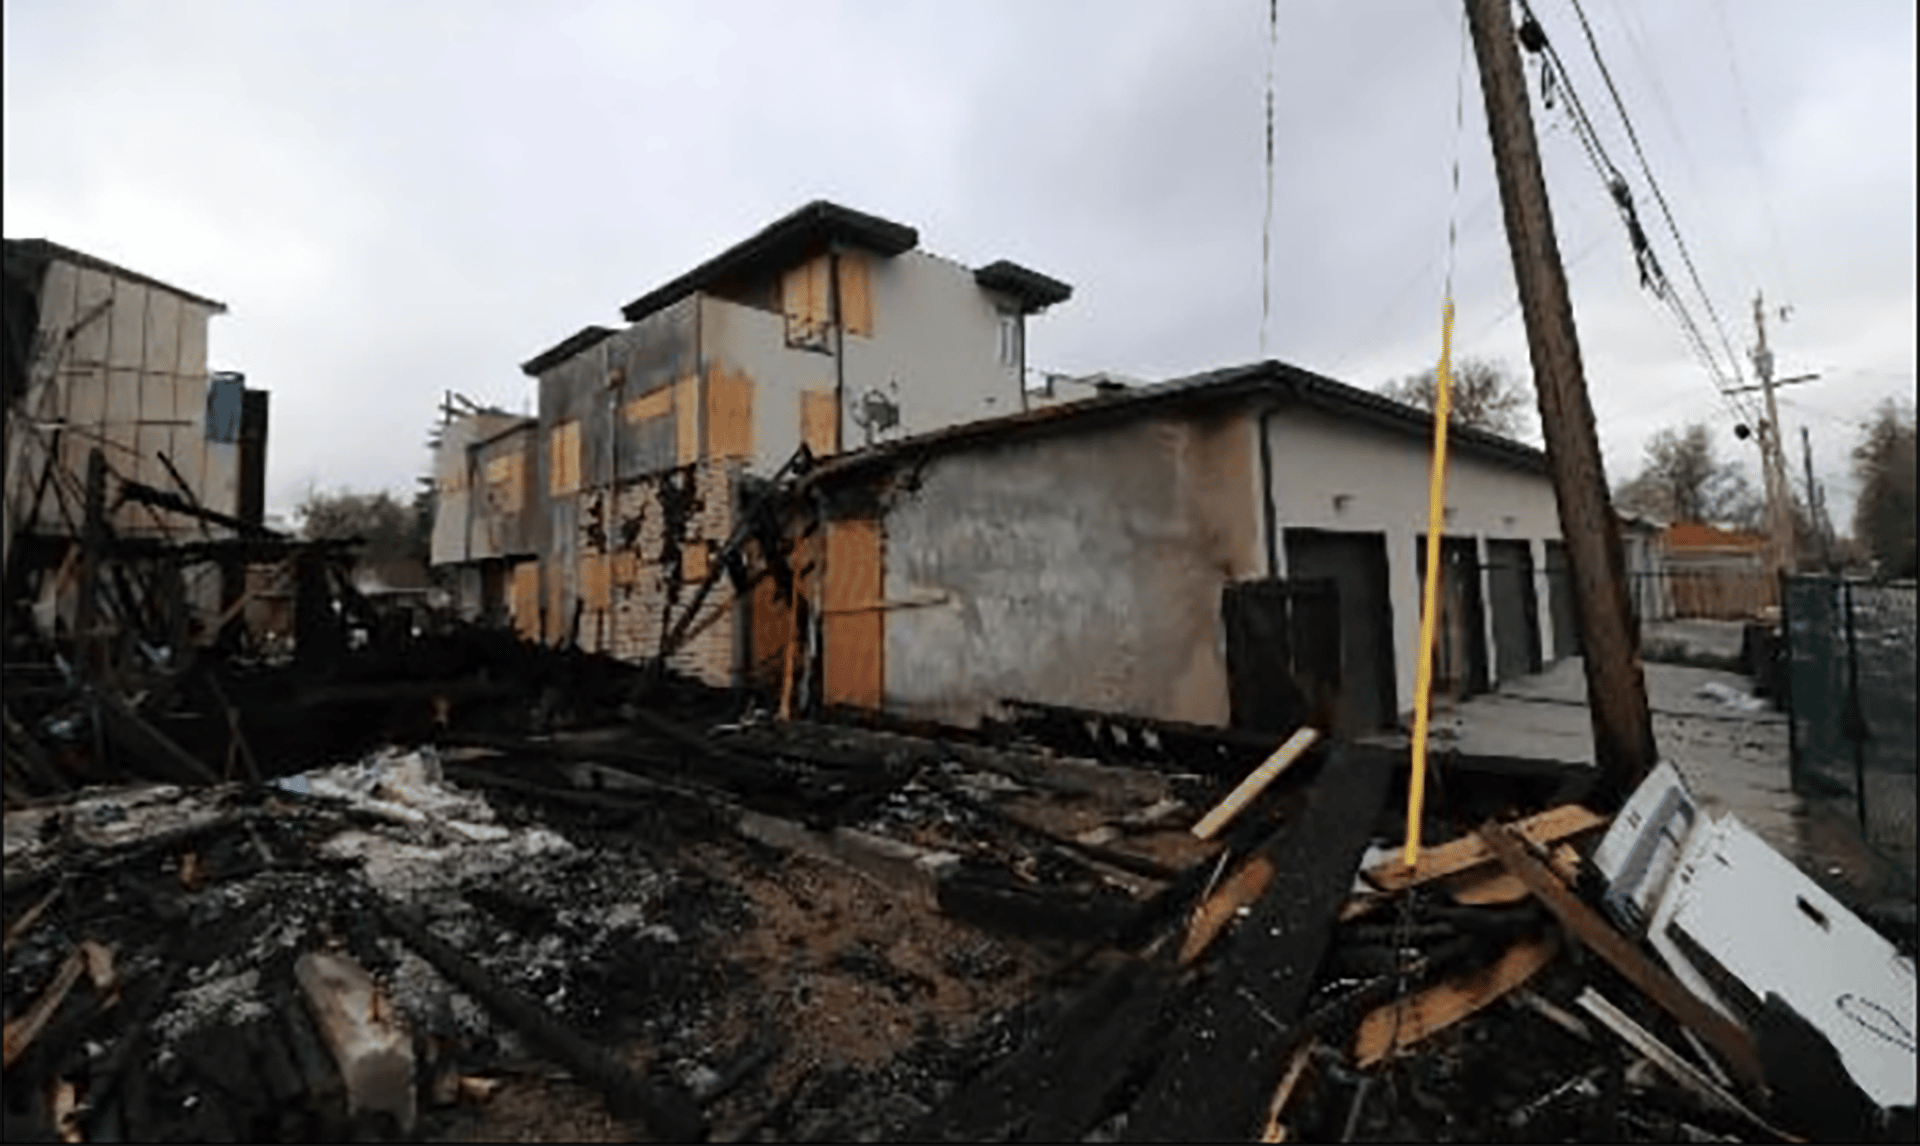 Denver homeowners sue contractor over fire damage